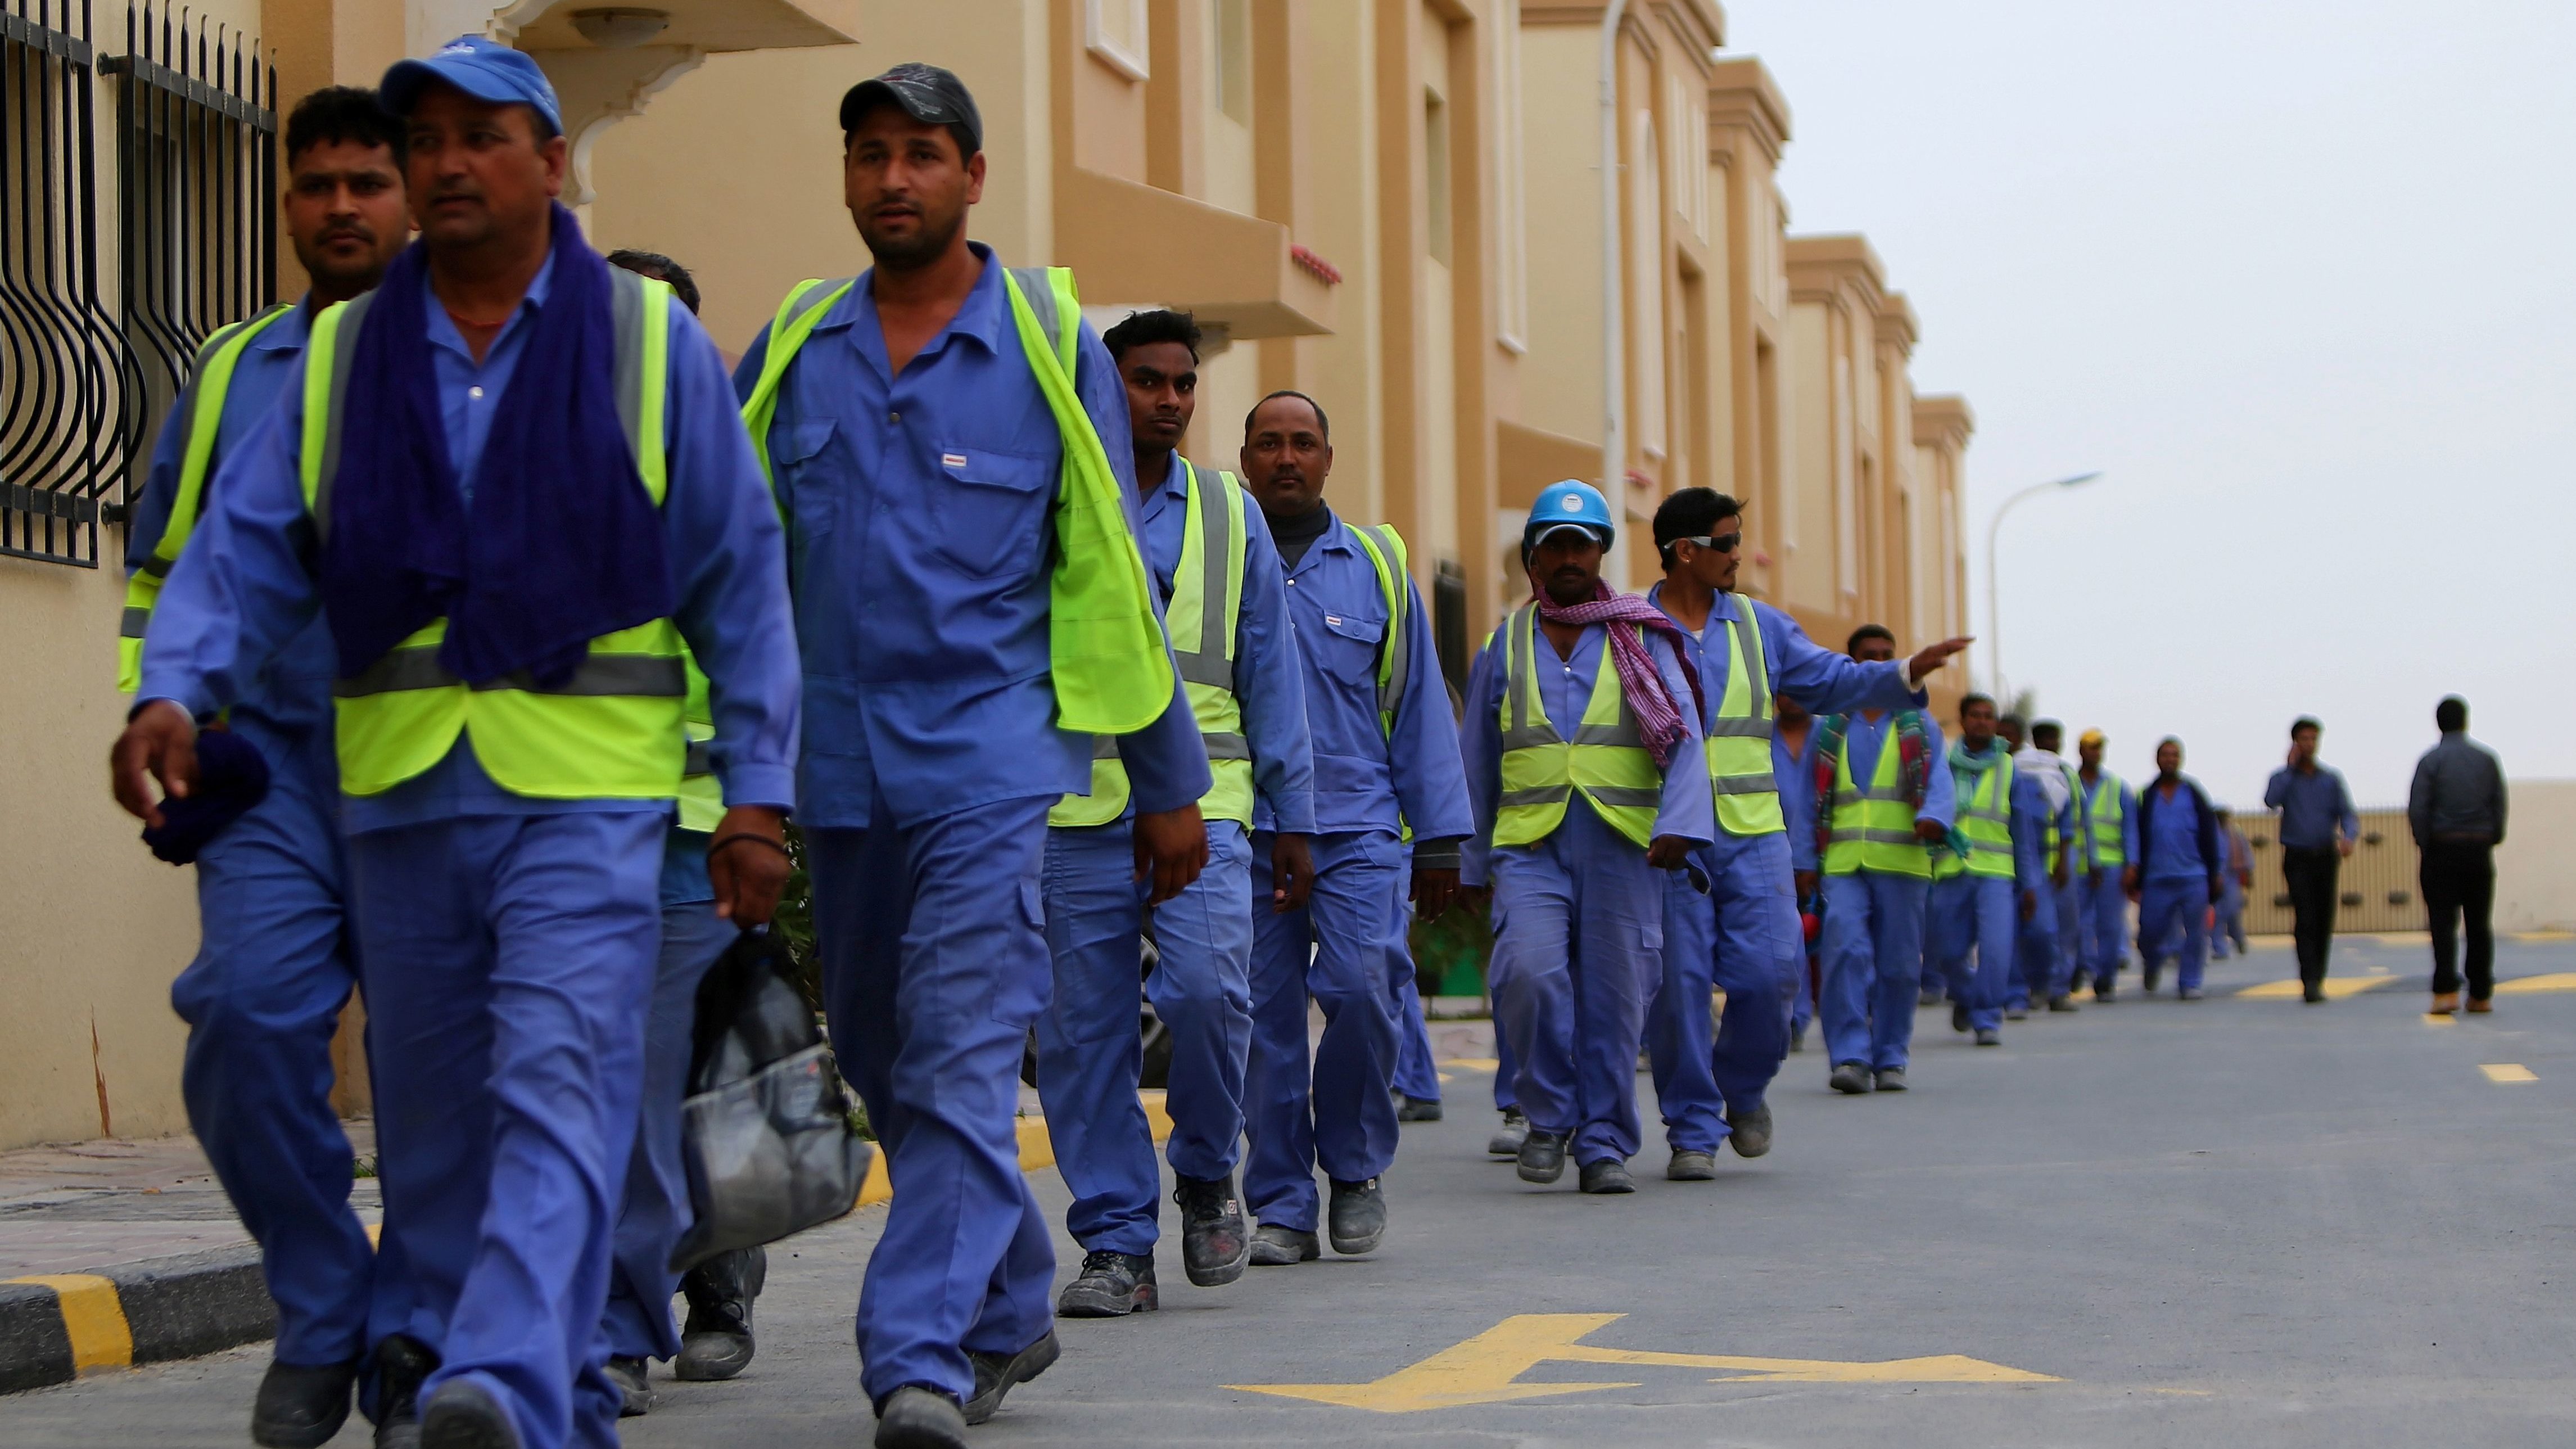 Qatar Cares About Migrant Workers, Official Says